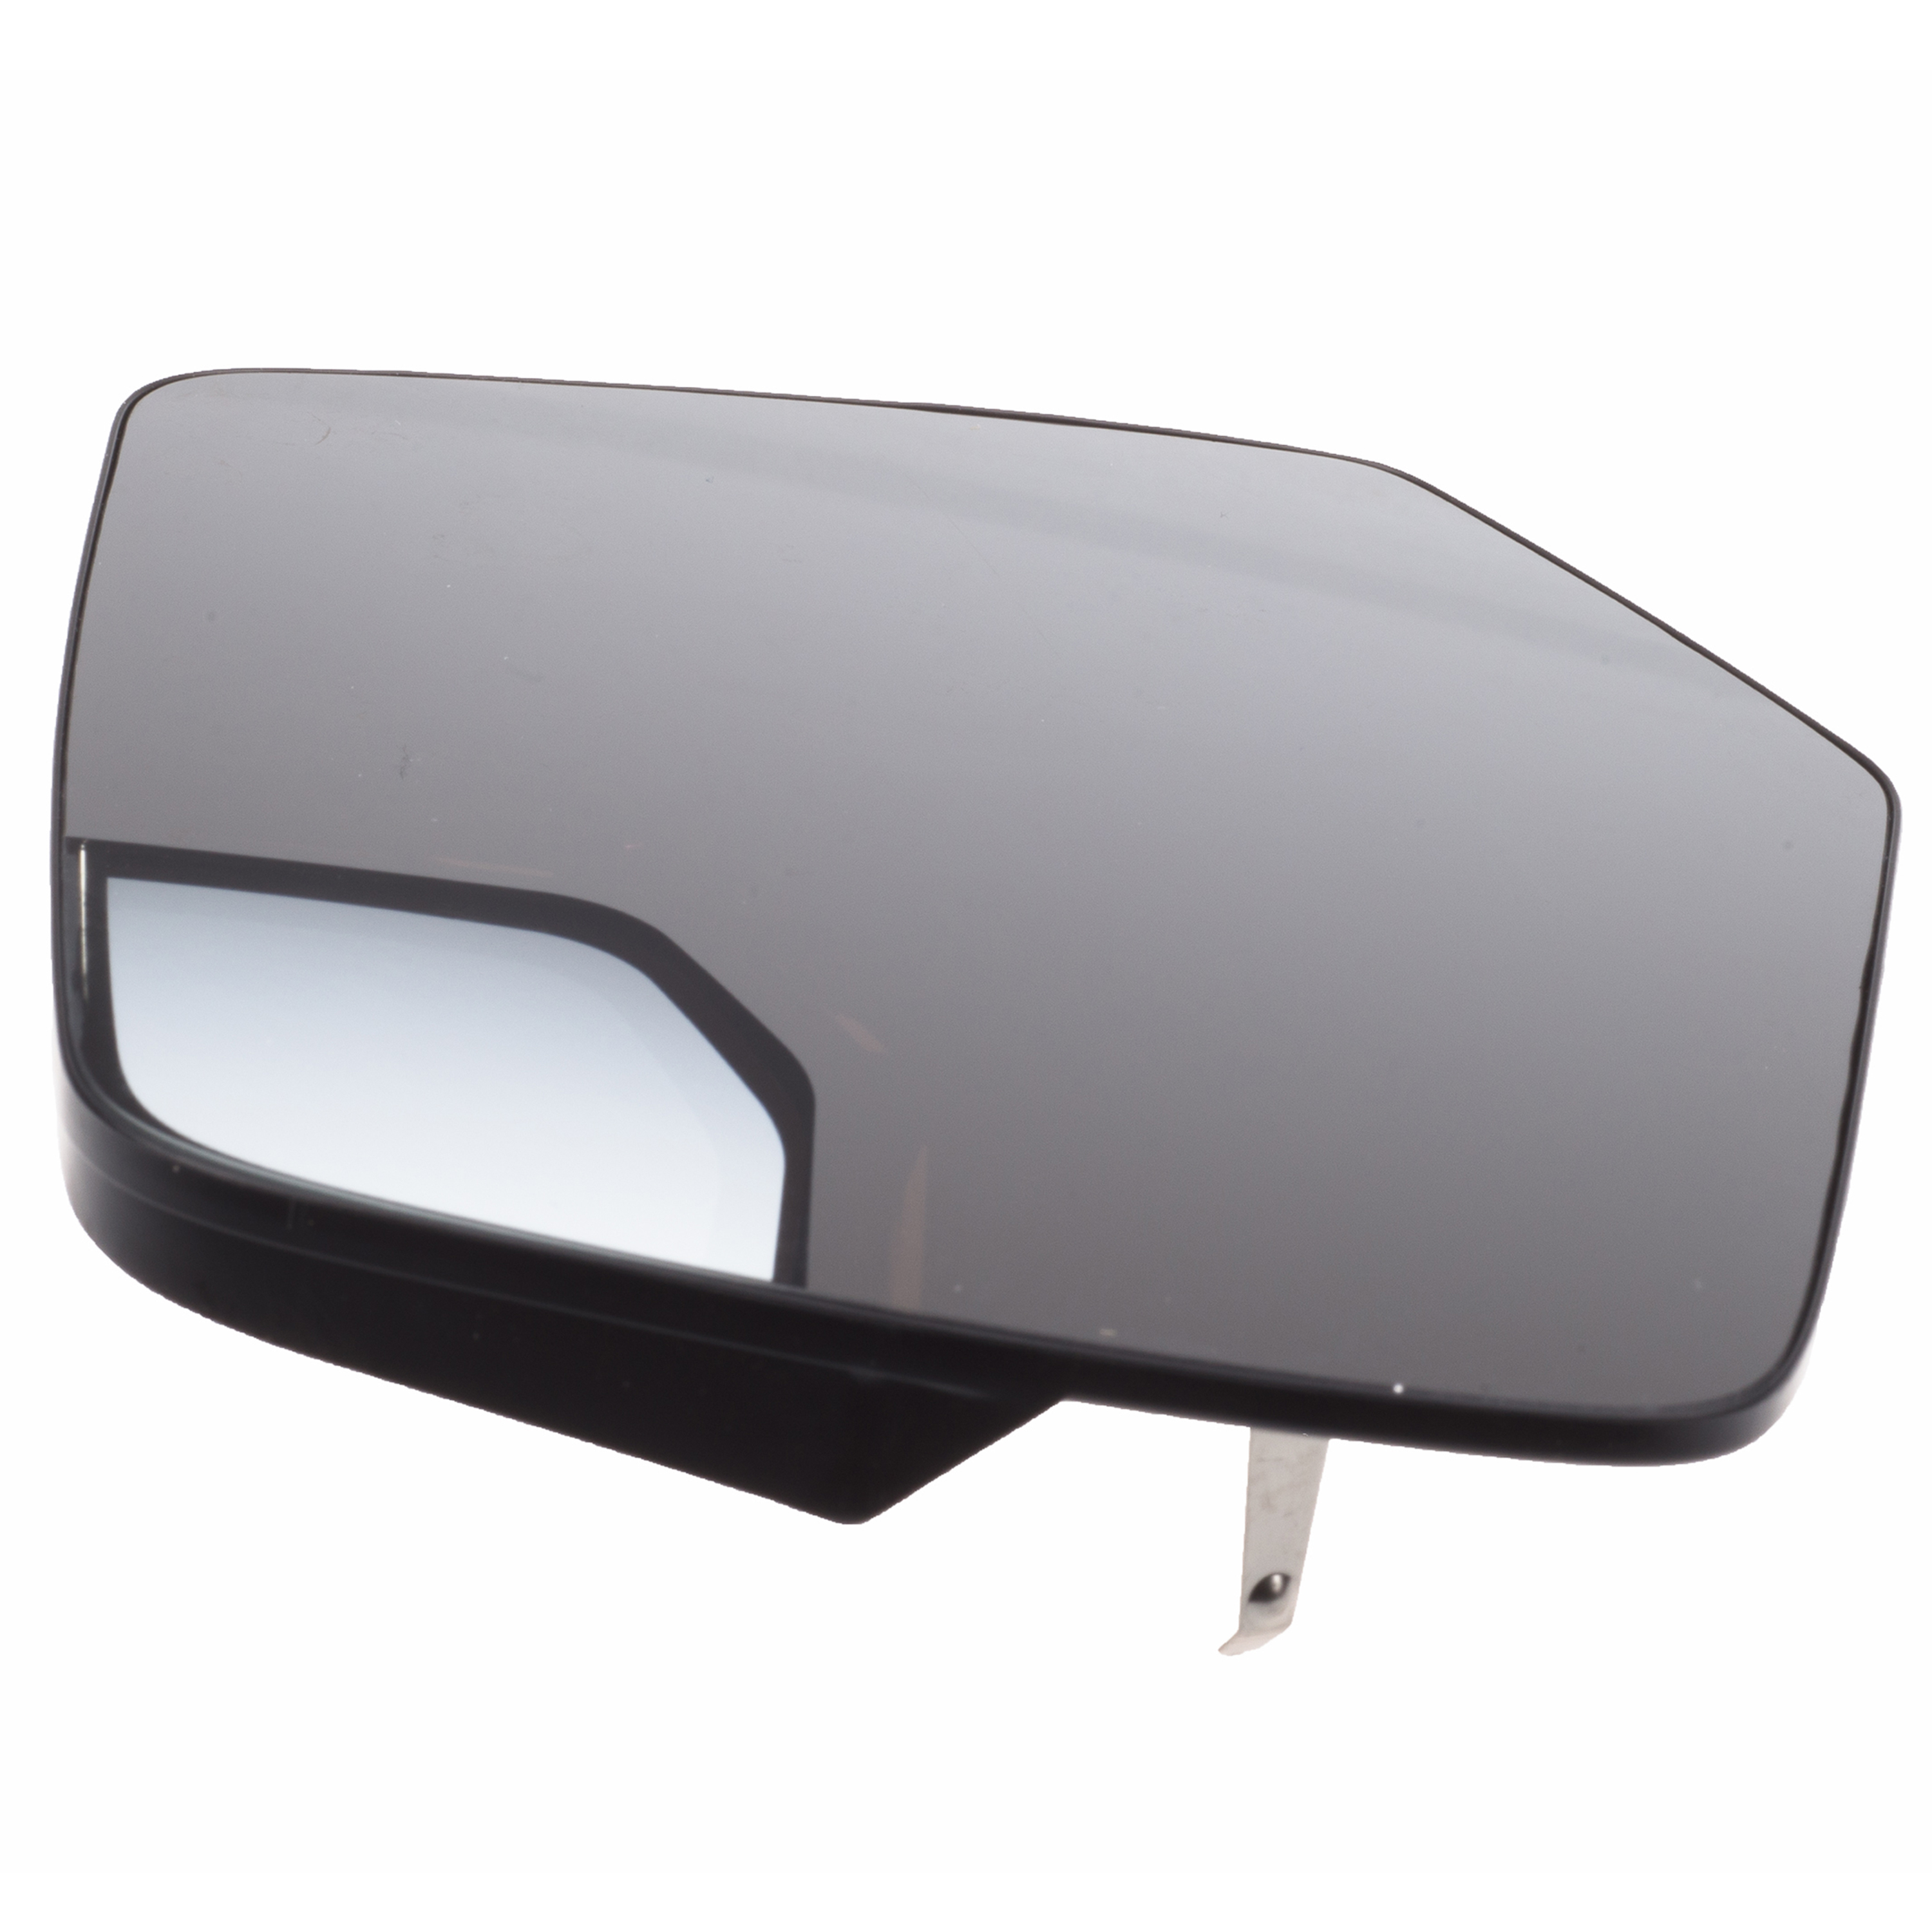 2010-2012 Ford Escape Mercury Mariner Left Driver Side View Mirror Glass OEM NEW | eBay 2012 Ford Escape Side Mirror Glass Replacement